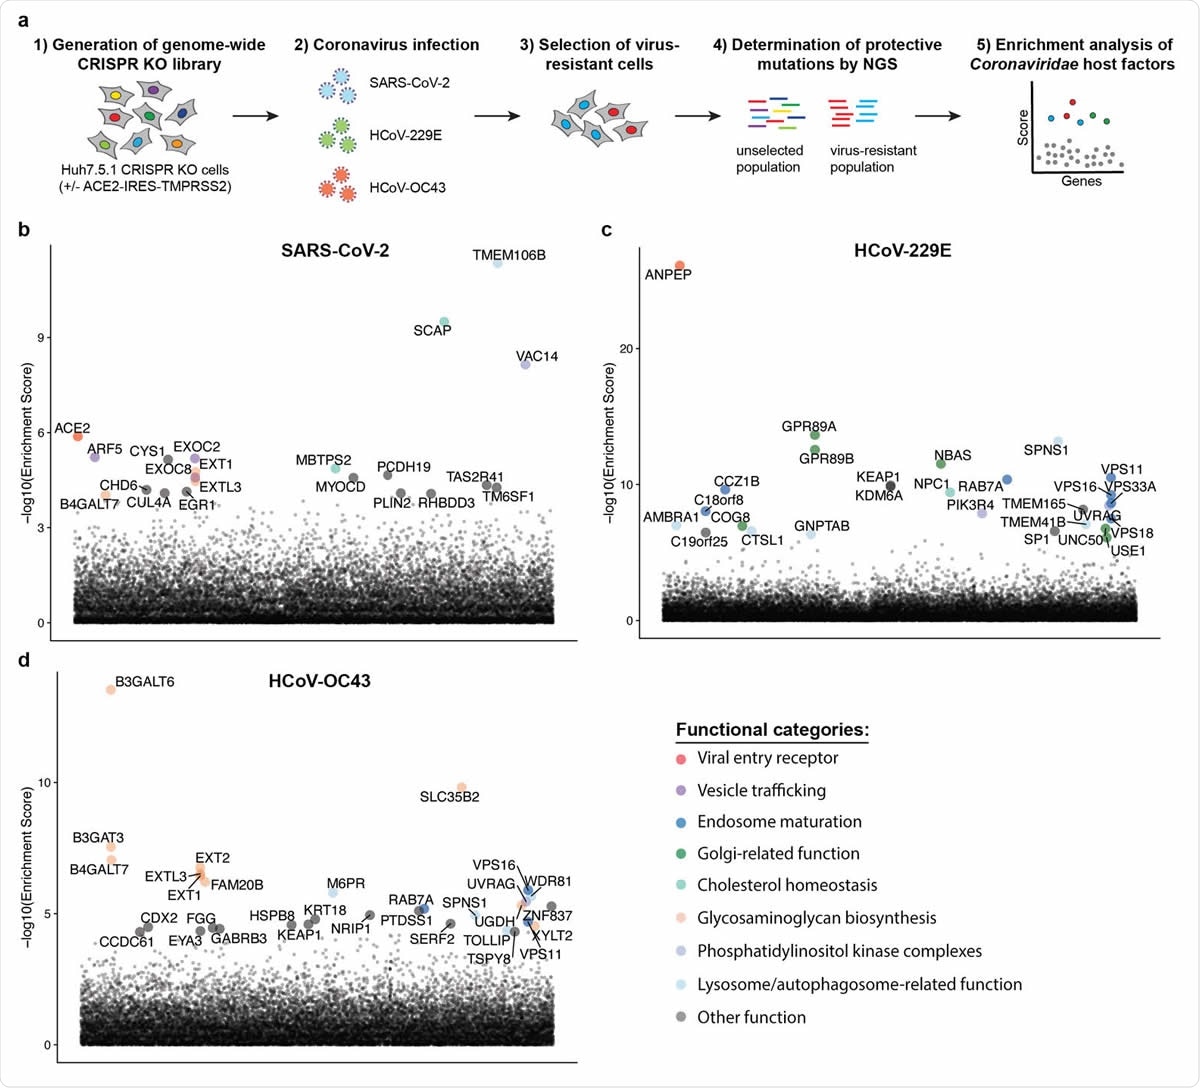 Genome-wide CRISPR KO screens in human cells identify host factors important for infection by for SARS-CoV-2, HCoV-229E and HCoV-OC43. (a) Schematic of CRISPR KO screens for the identification of coronavirus host factors. Huh7.5.1-Cas9 (with bicistronic ACE2-IRES-TMPRSS2 construct for SARS-CoV-2 and without for 229E and OC43 screen) were mutagenized using a genome-wide sgRNA library. Mutant cells were infected with each coronavirus separately and virus-resistant cells were harvested 10-14 days post infection (dpi). The abundance 347 of each sgRNA in the starting and selected population was determined by high-throughput sequencing and a gene enrichment analysis was performed. (b-d) Gene enrichment of CRISPR screens for (b) SARS-CoV-2, (c) 229E and (d) OC43 infection. Enrichment scores were determined by MaGECK analysis and genes were colored by biological function. The SARS-CoV-2 was performed once. The 229E and OC43 screens were performed twice and combined MaGECK scores are displayed.